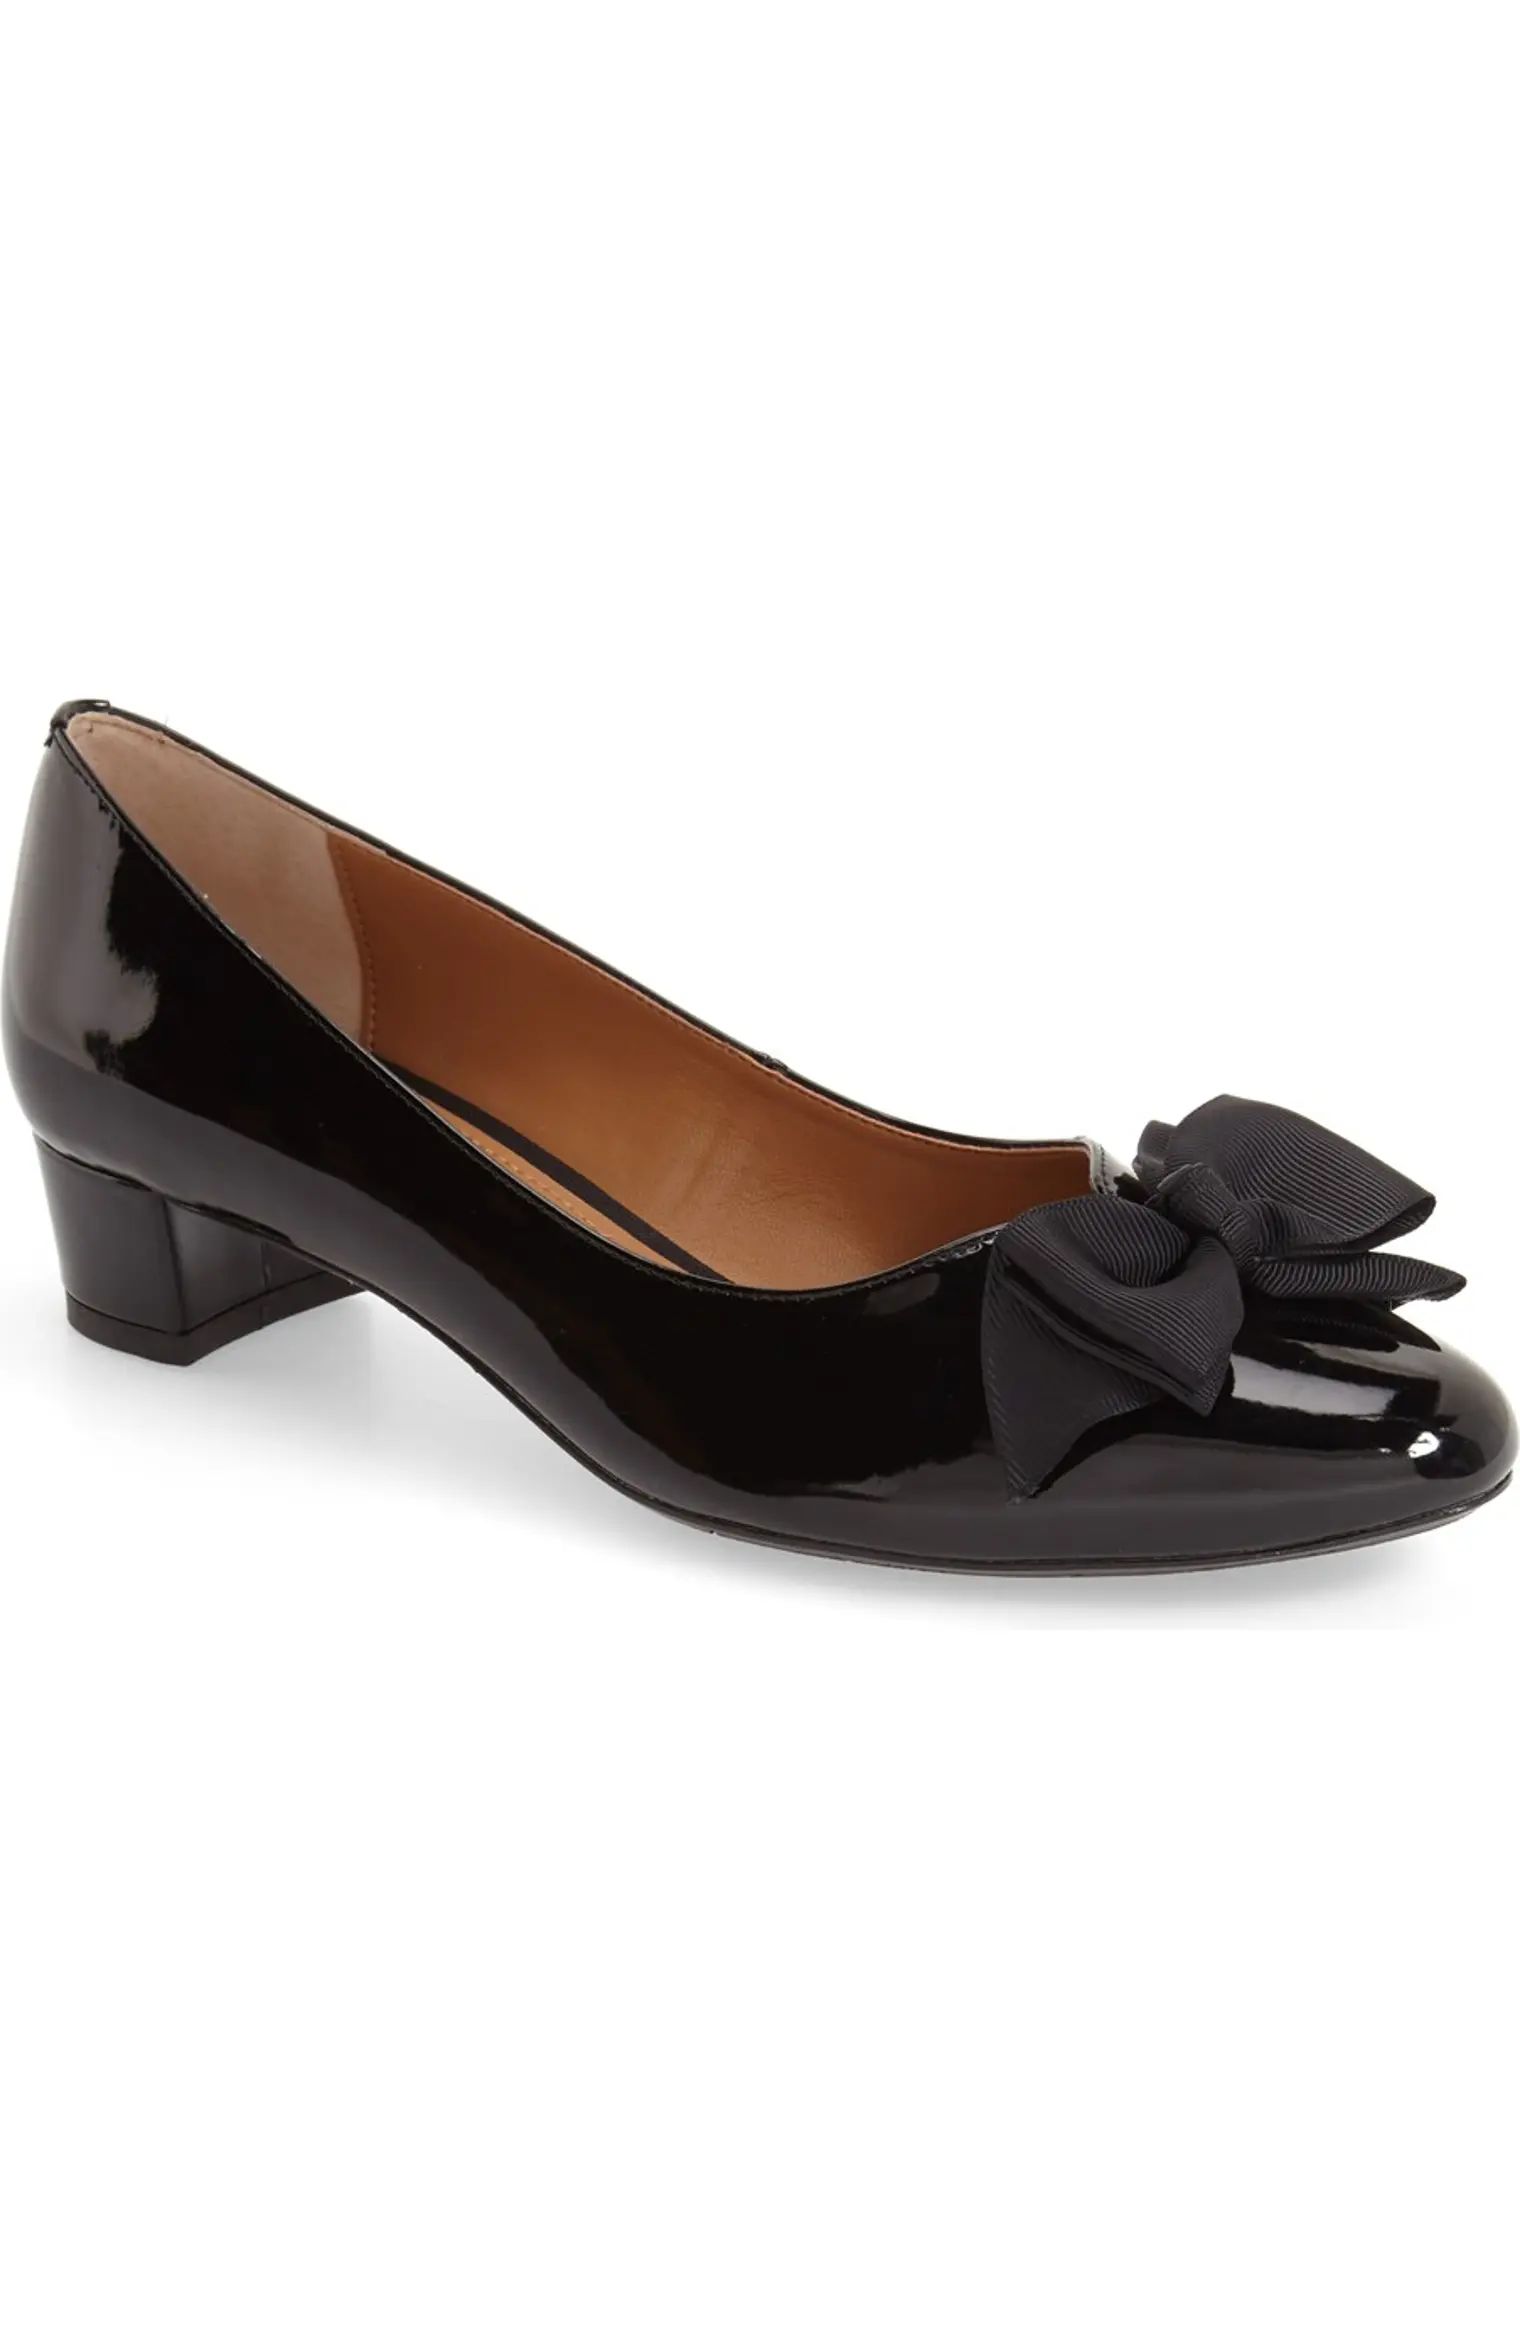 'Cameo' Bow Pump | Nordstrom